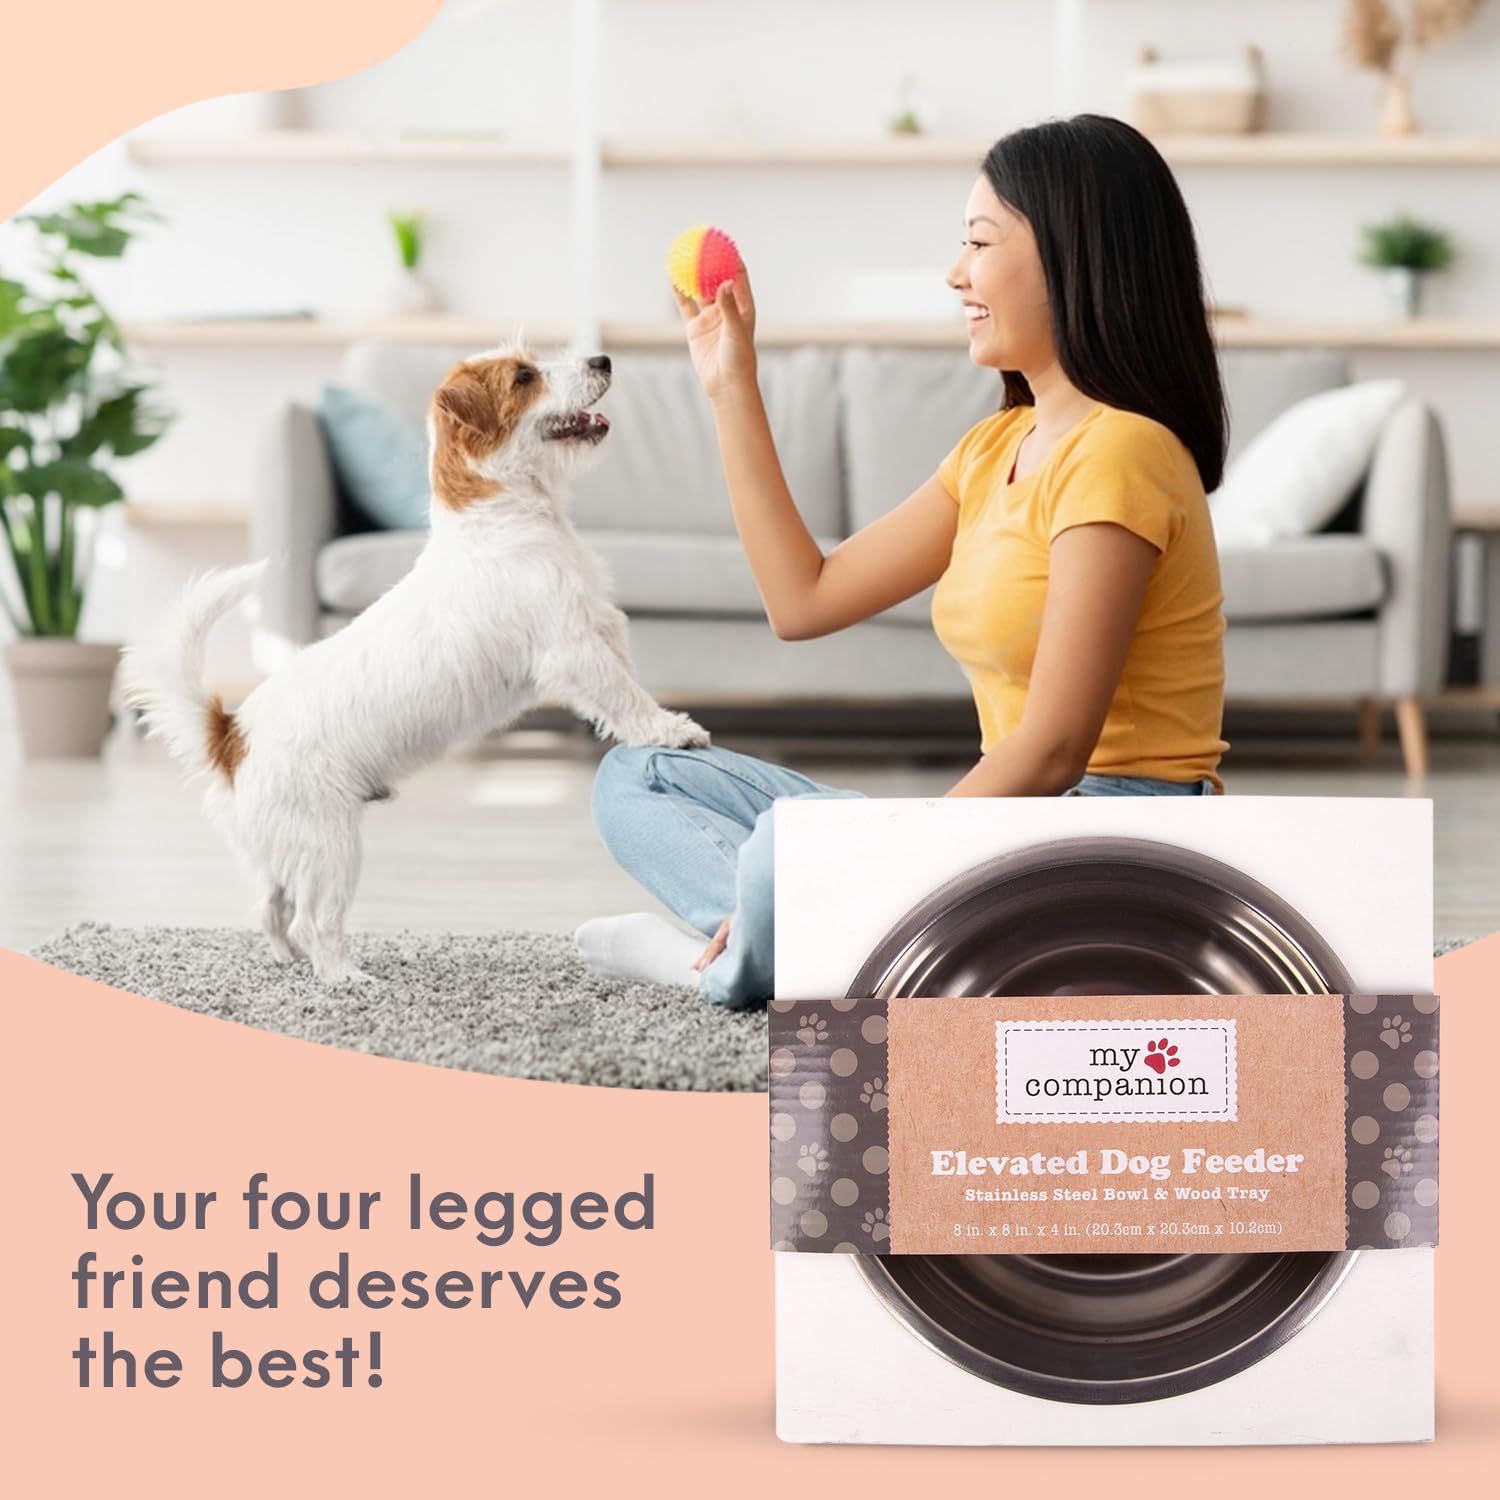 MosJos Elevated Feeding Pet Bowl - Dog, Puppy Supplies, Stainless Steel Bucket with Wooden Base, Pet Bowl Features Text Design, Your Pets and Puppies. Dishwasher Safe  - Like New